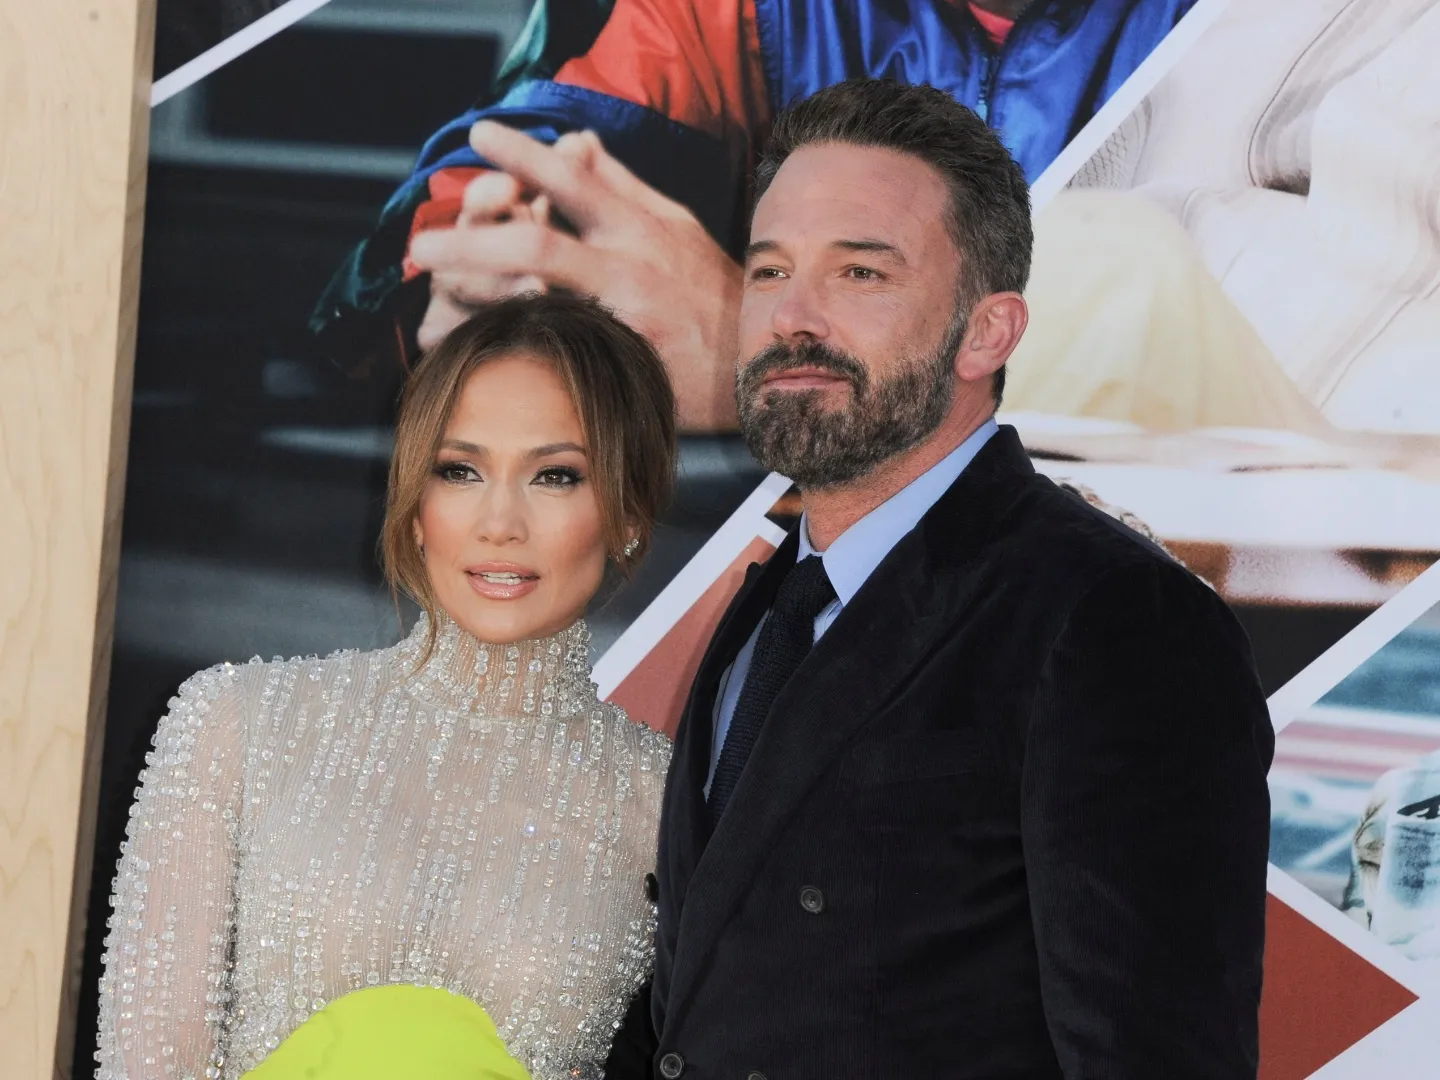 Ben Affleck and Jennifer Lopez Squash Divorce Talk with Loving Outing at Daughter's School Play